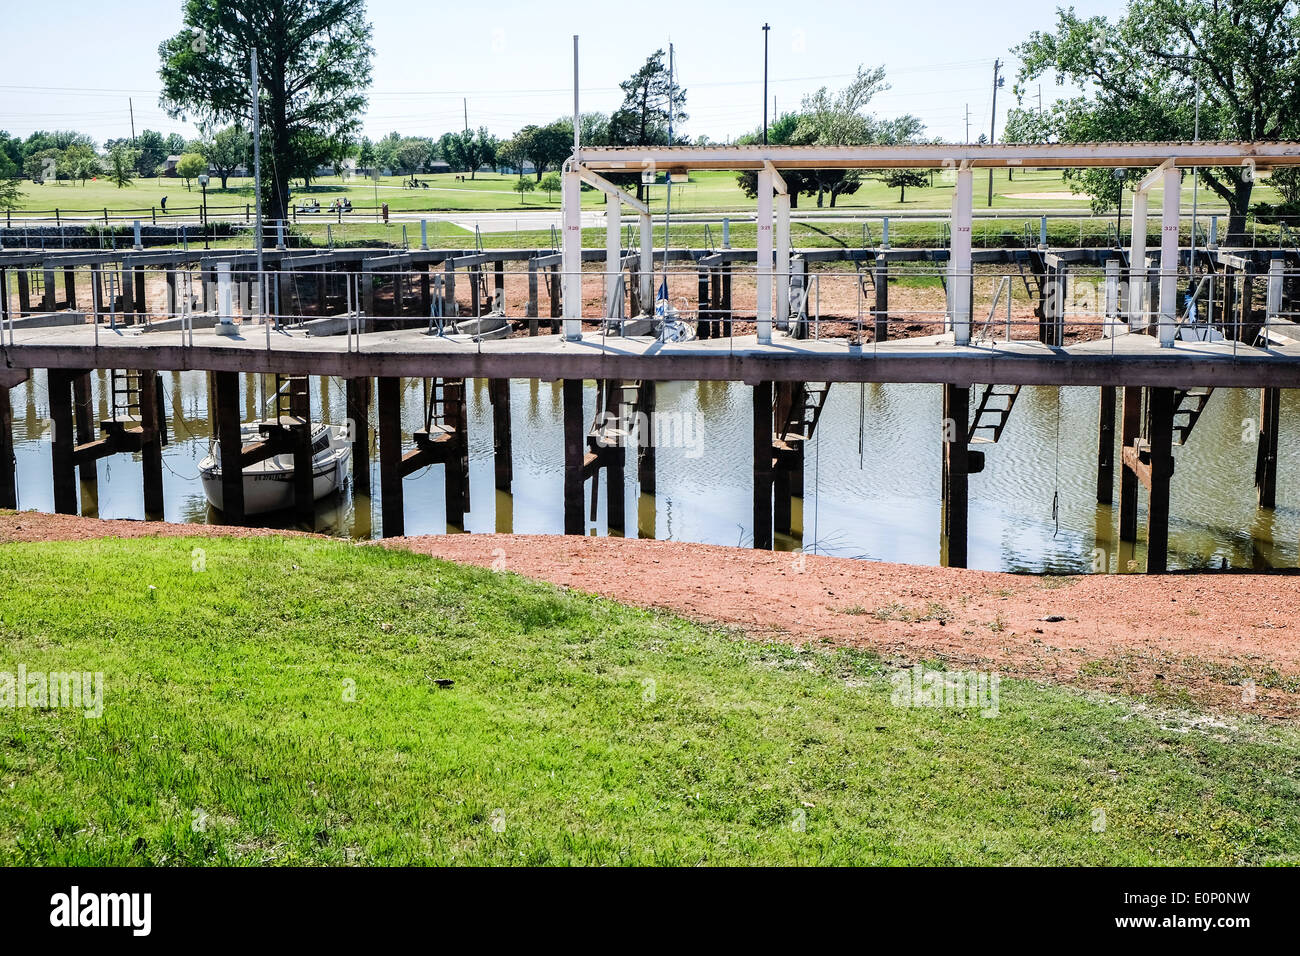 At Lake Hefner in Okllahoma City, Oklahoma, USA, a severe drought has lowered lake levels and left boats unable to dock. Stock Photo